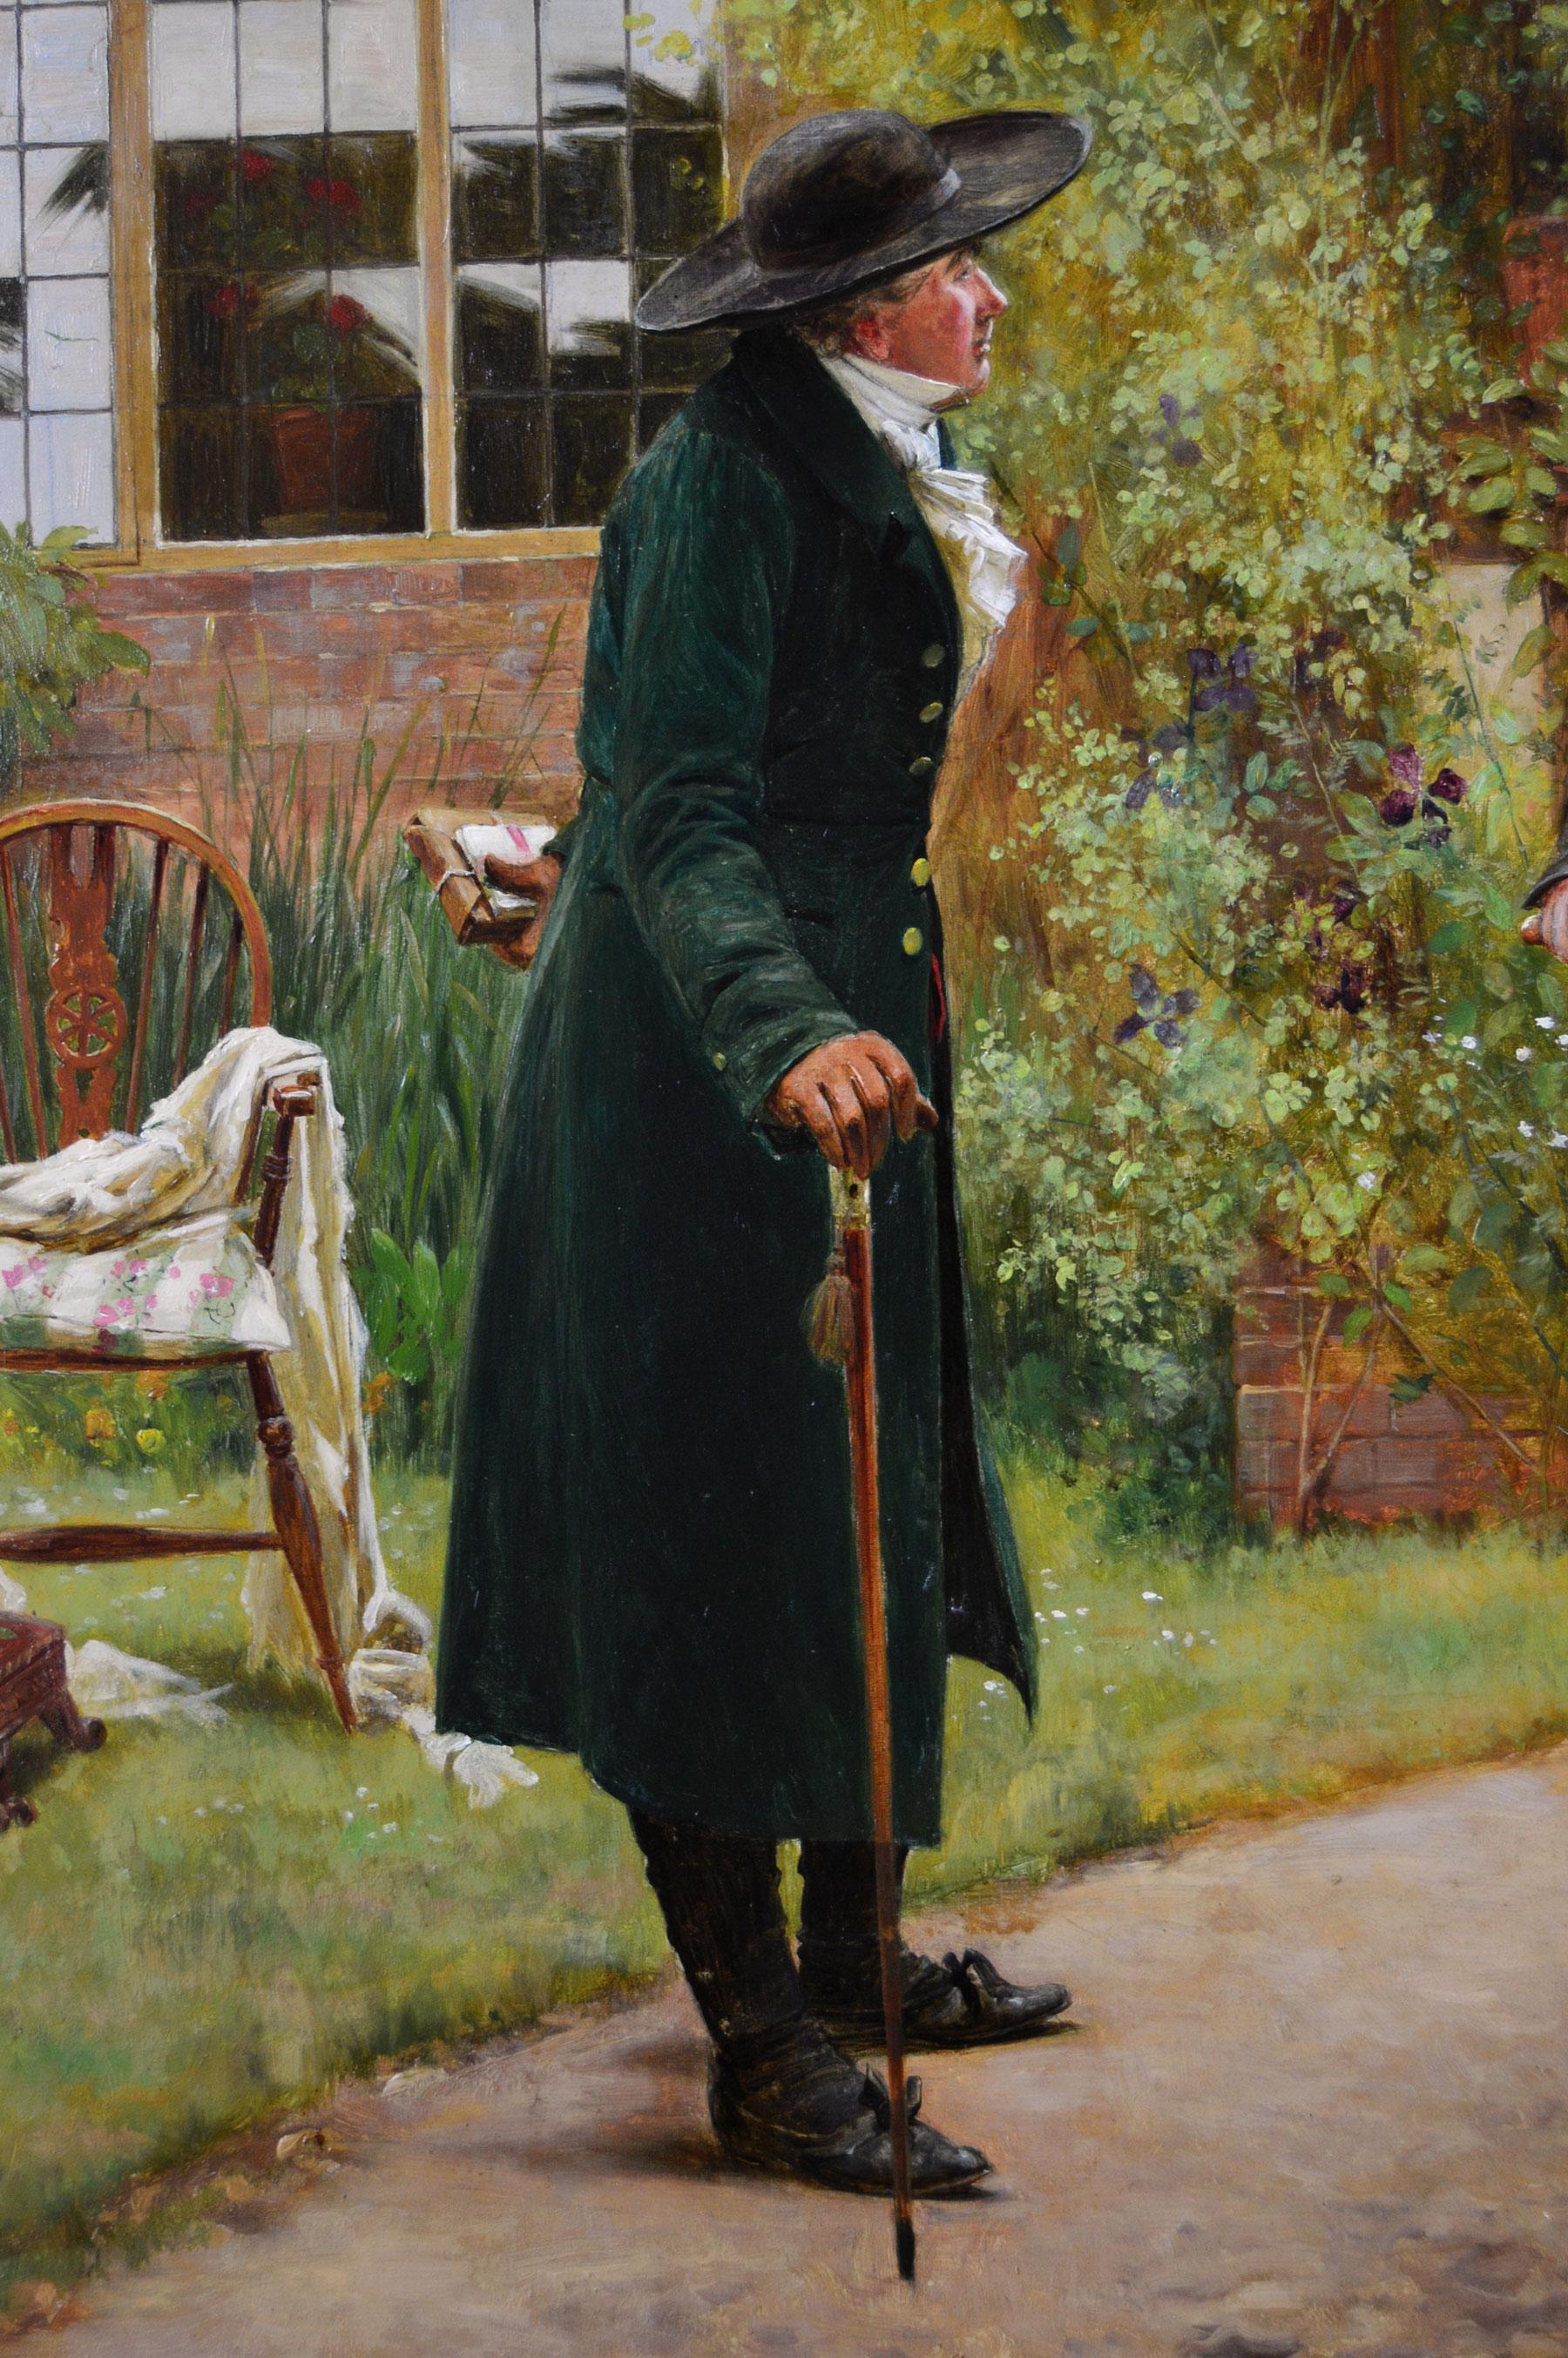 Walter Dendy Sadler
British, (1854-1923)
The Widow’s Birthday
Oil on canvas, signed
Image size: 23.5 inches x 33.5 inches 
Size including frame: 30.75 inches x 40.75 inches
Provenance: Exhibited at the Royal Academy 1889, no. 1228; Illustrated in